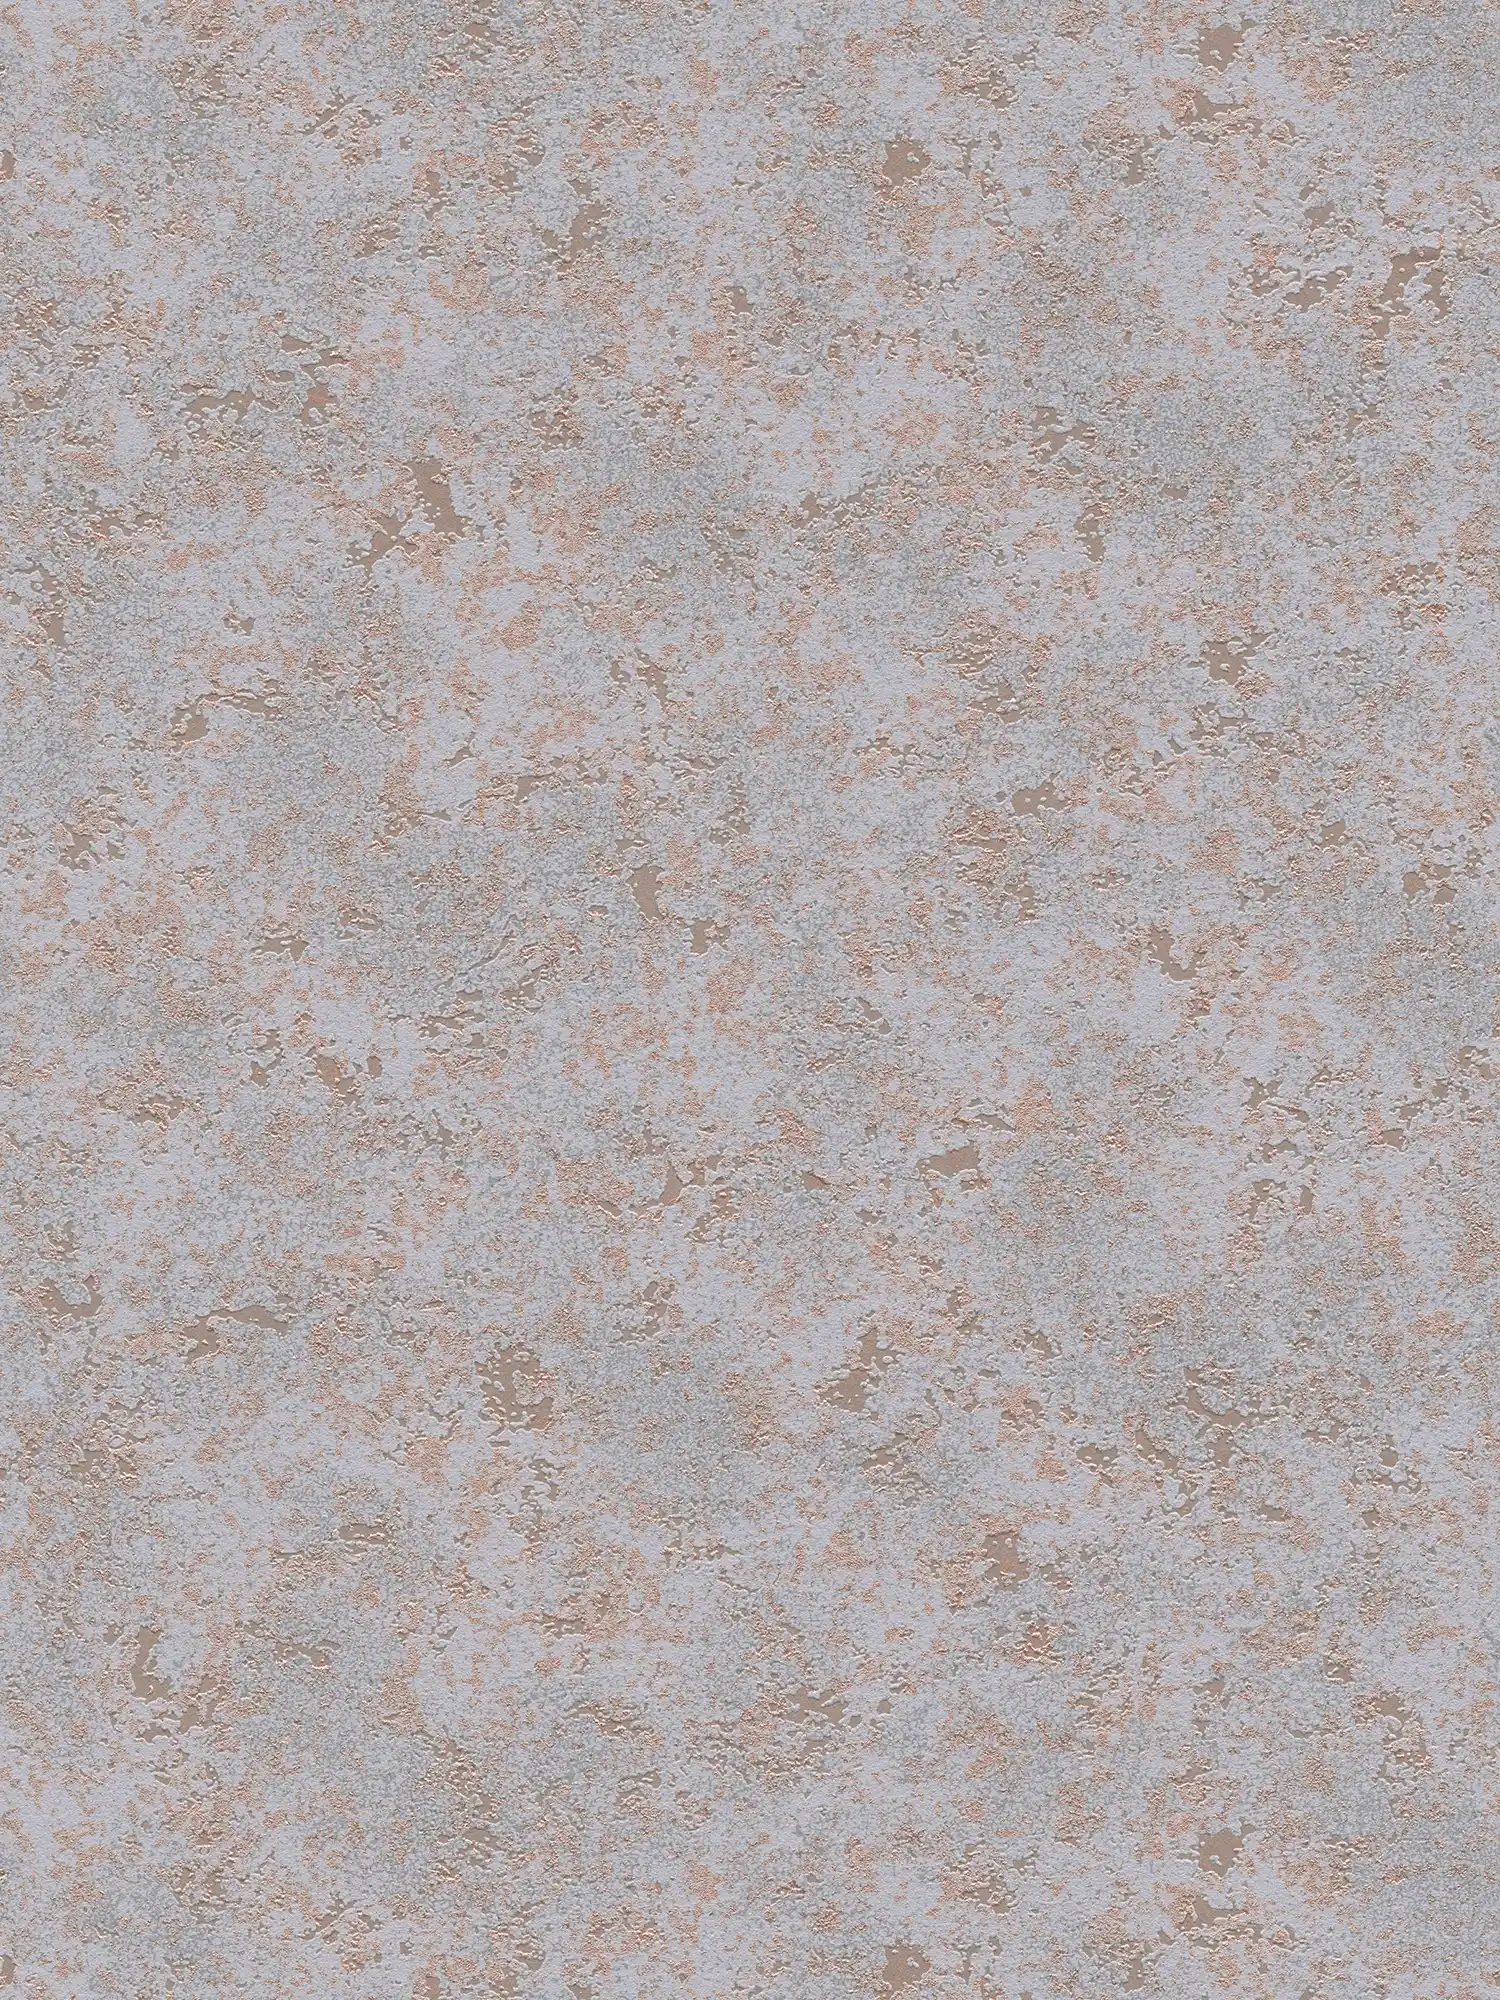             Non-woven wallpaper with textured pattern in plaster look - grey
        